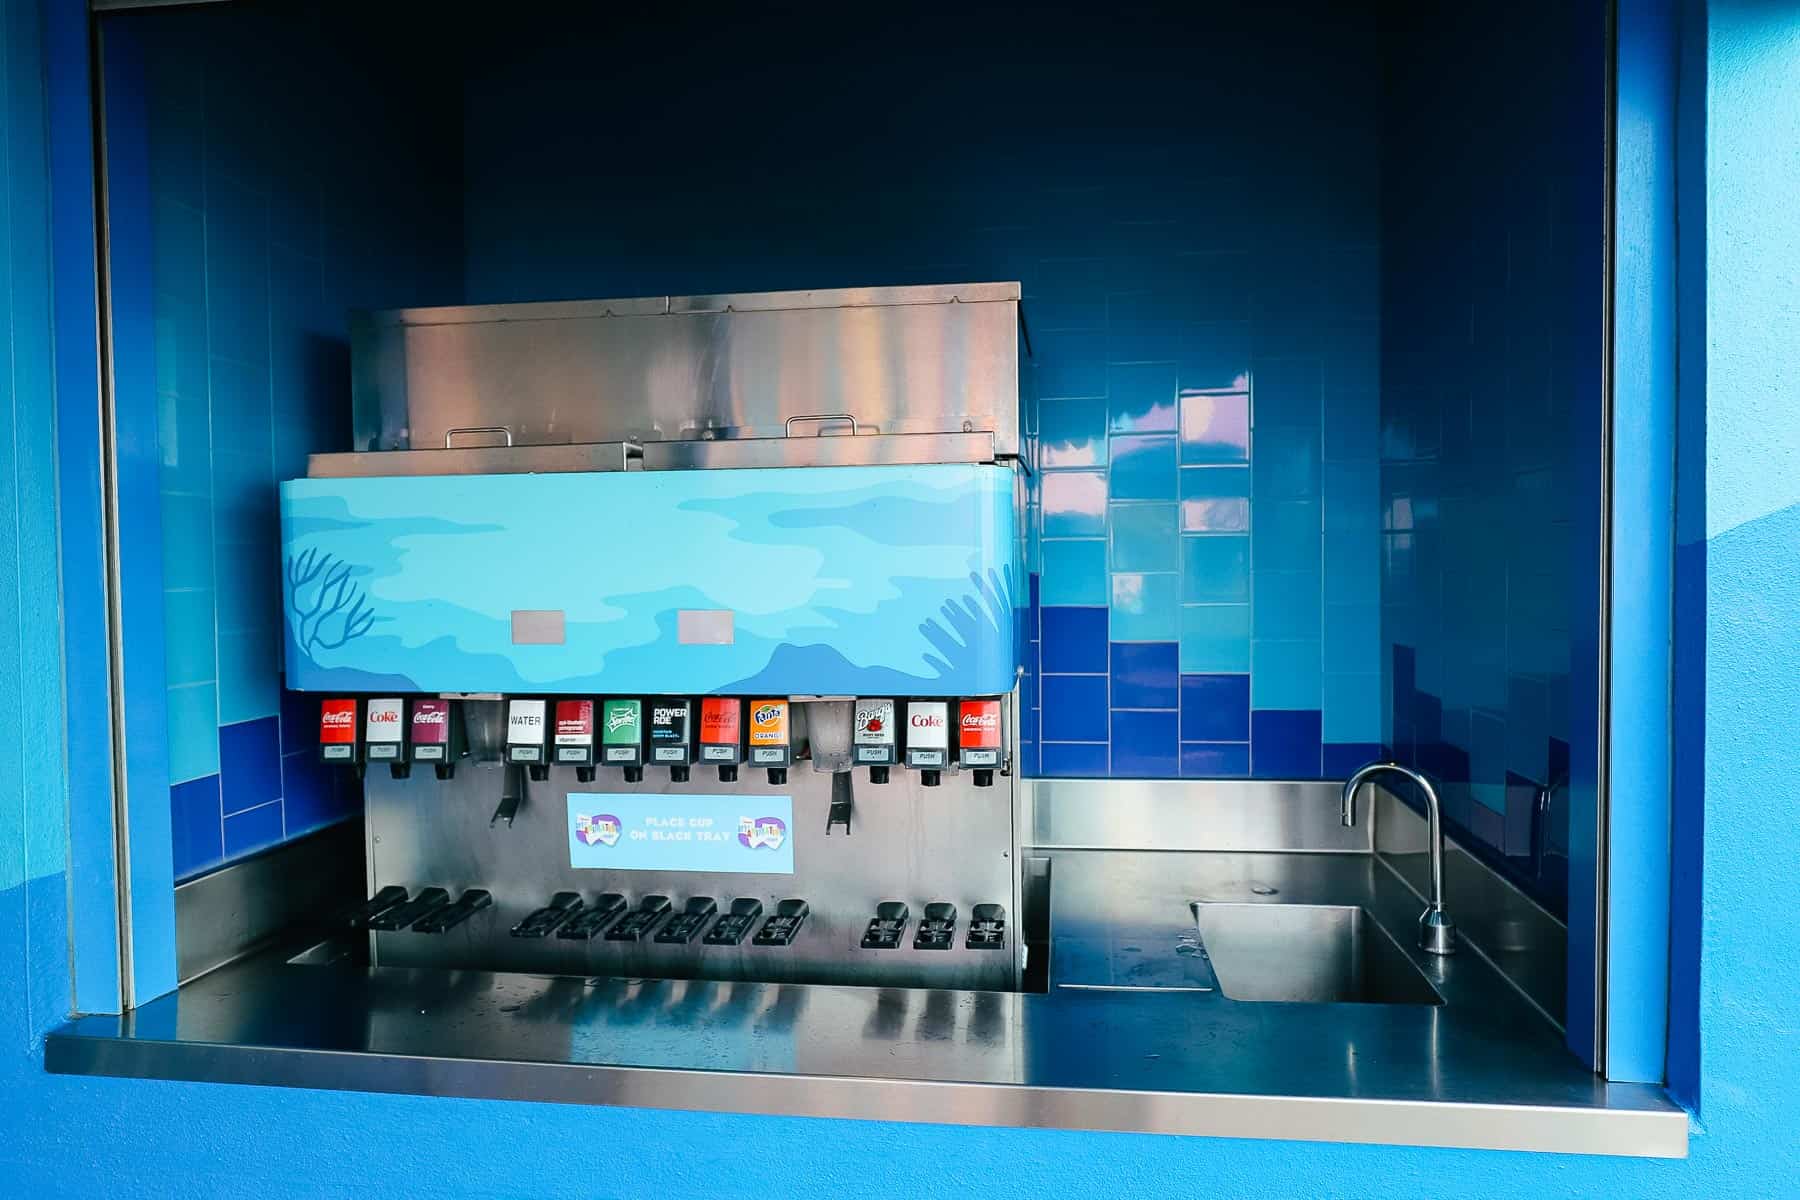 a refillable beverage machine by The Big Blue Pool at Art of Animation 